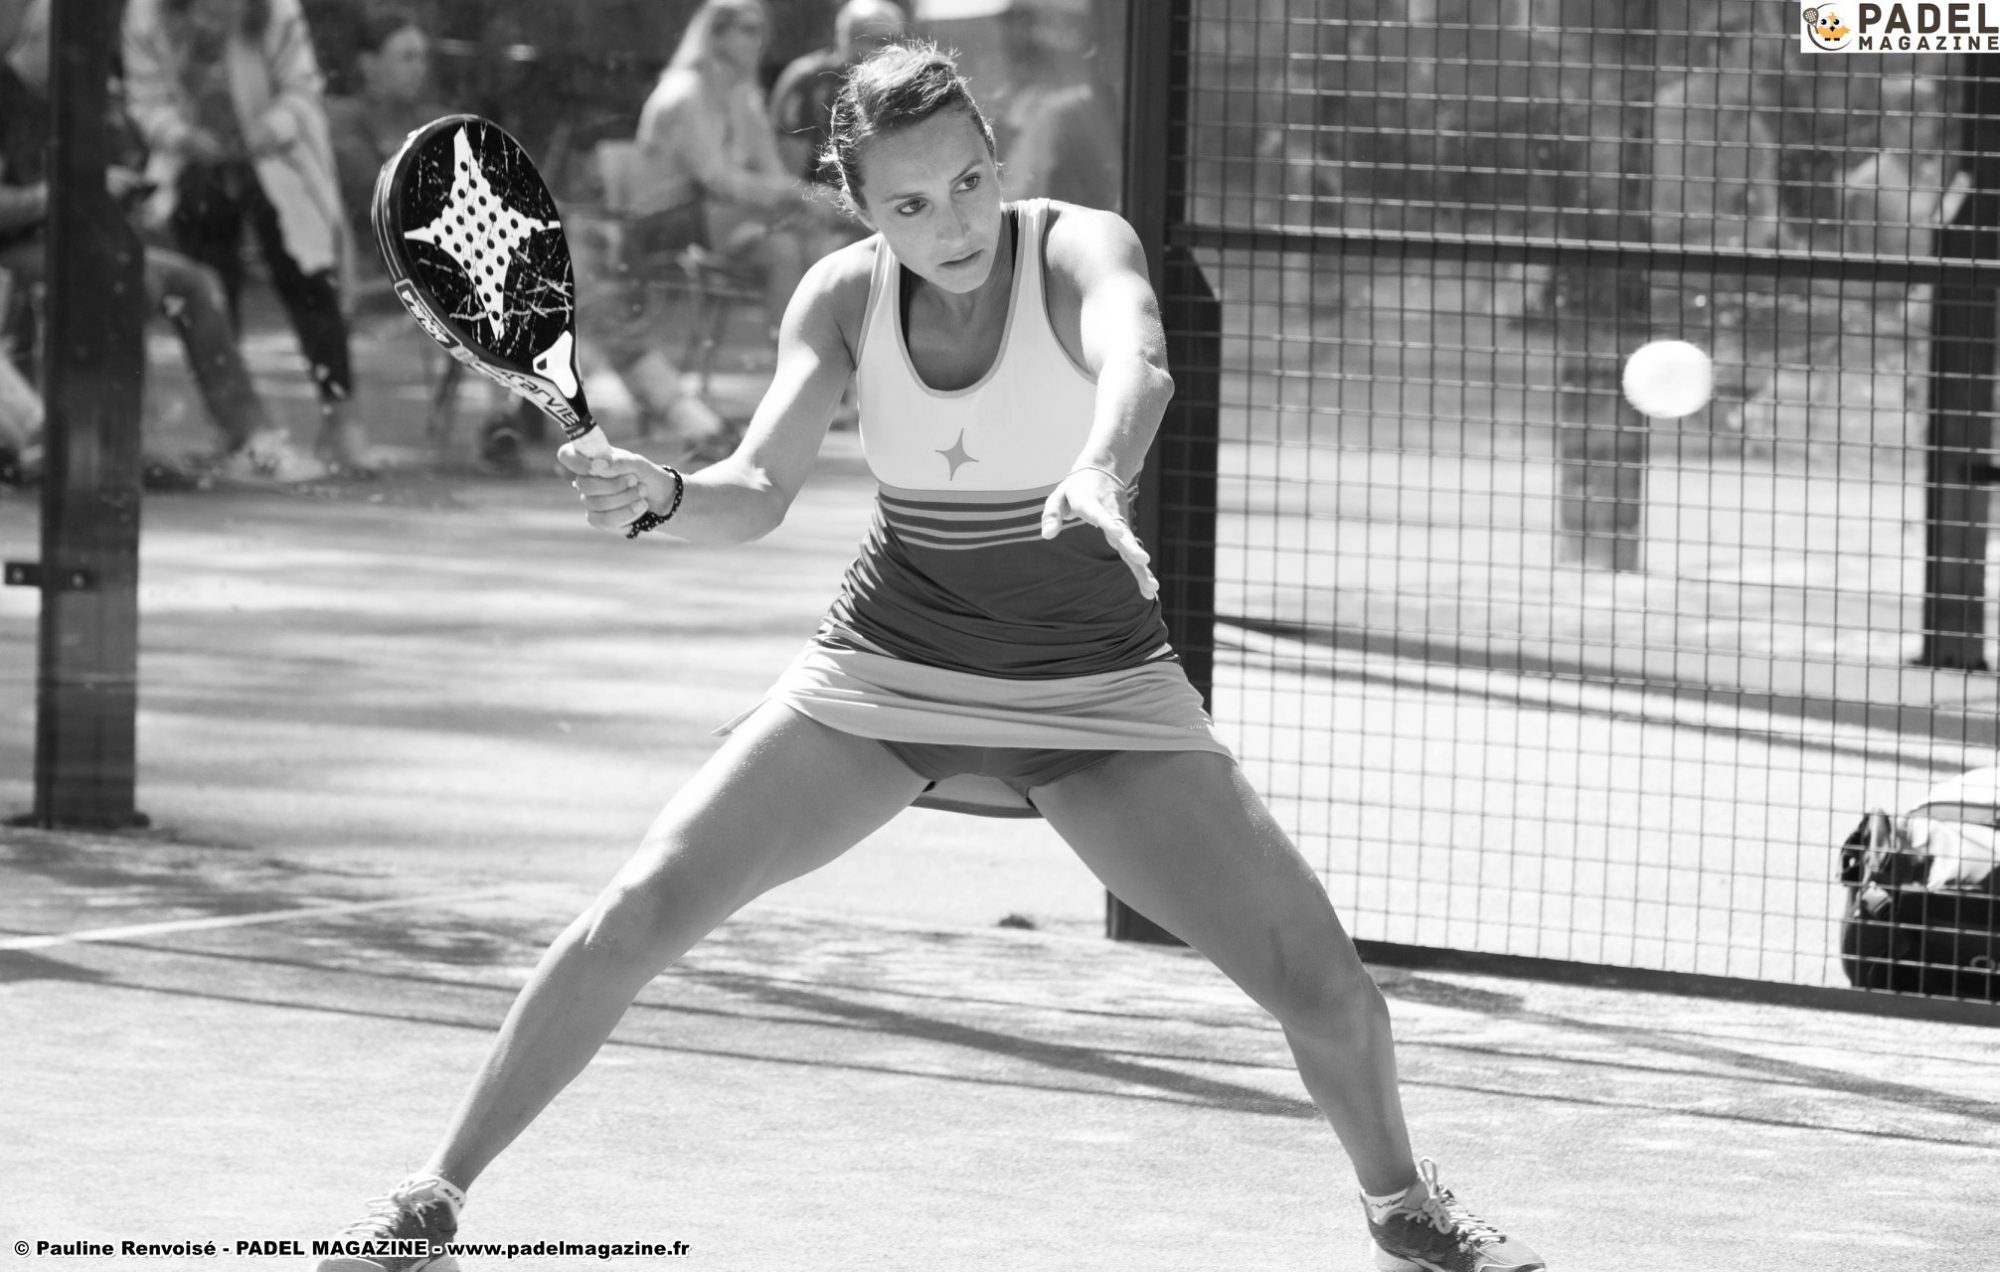 Jessica Ginier: “Alix Collombon introduced me to padel"